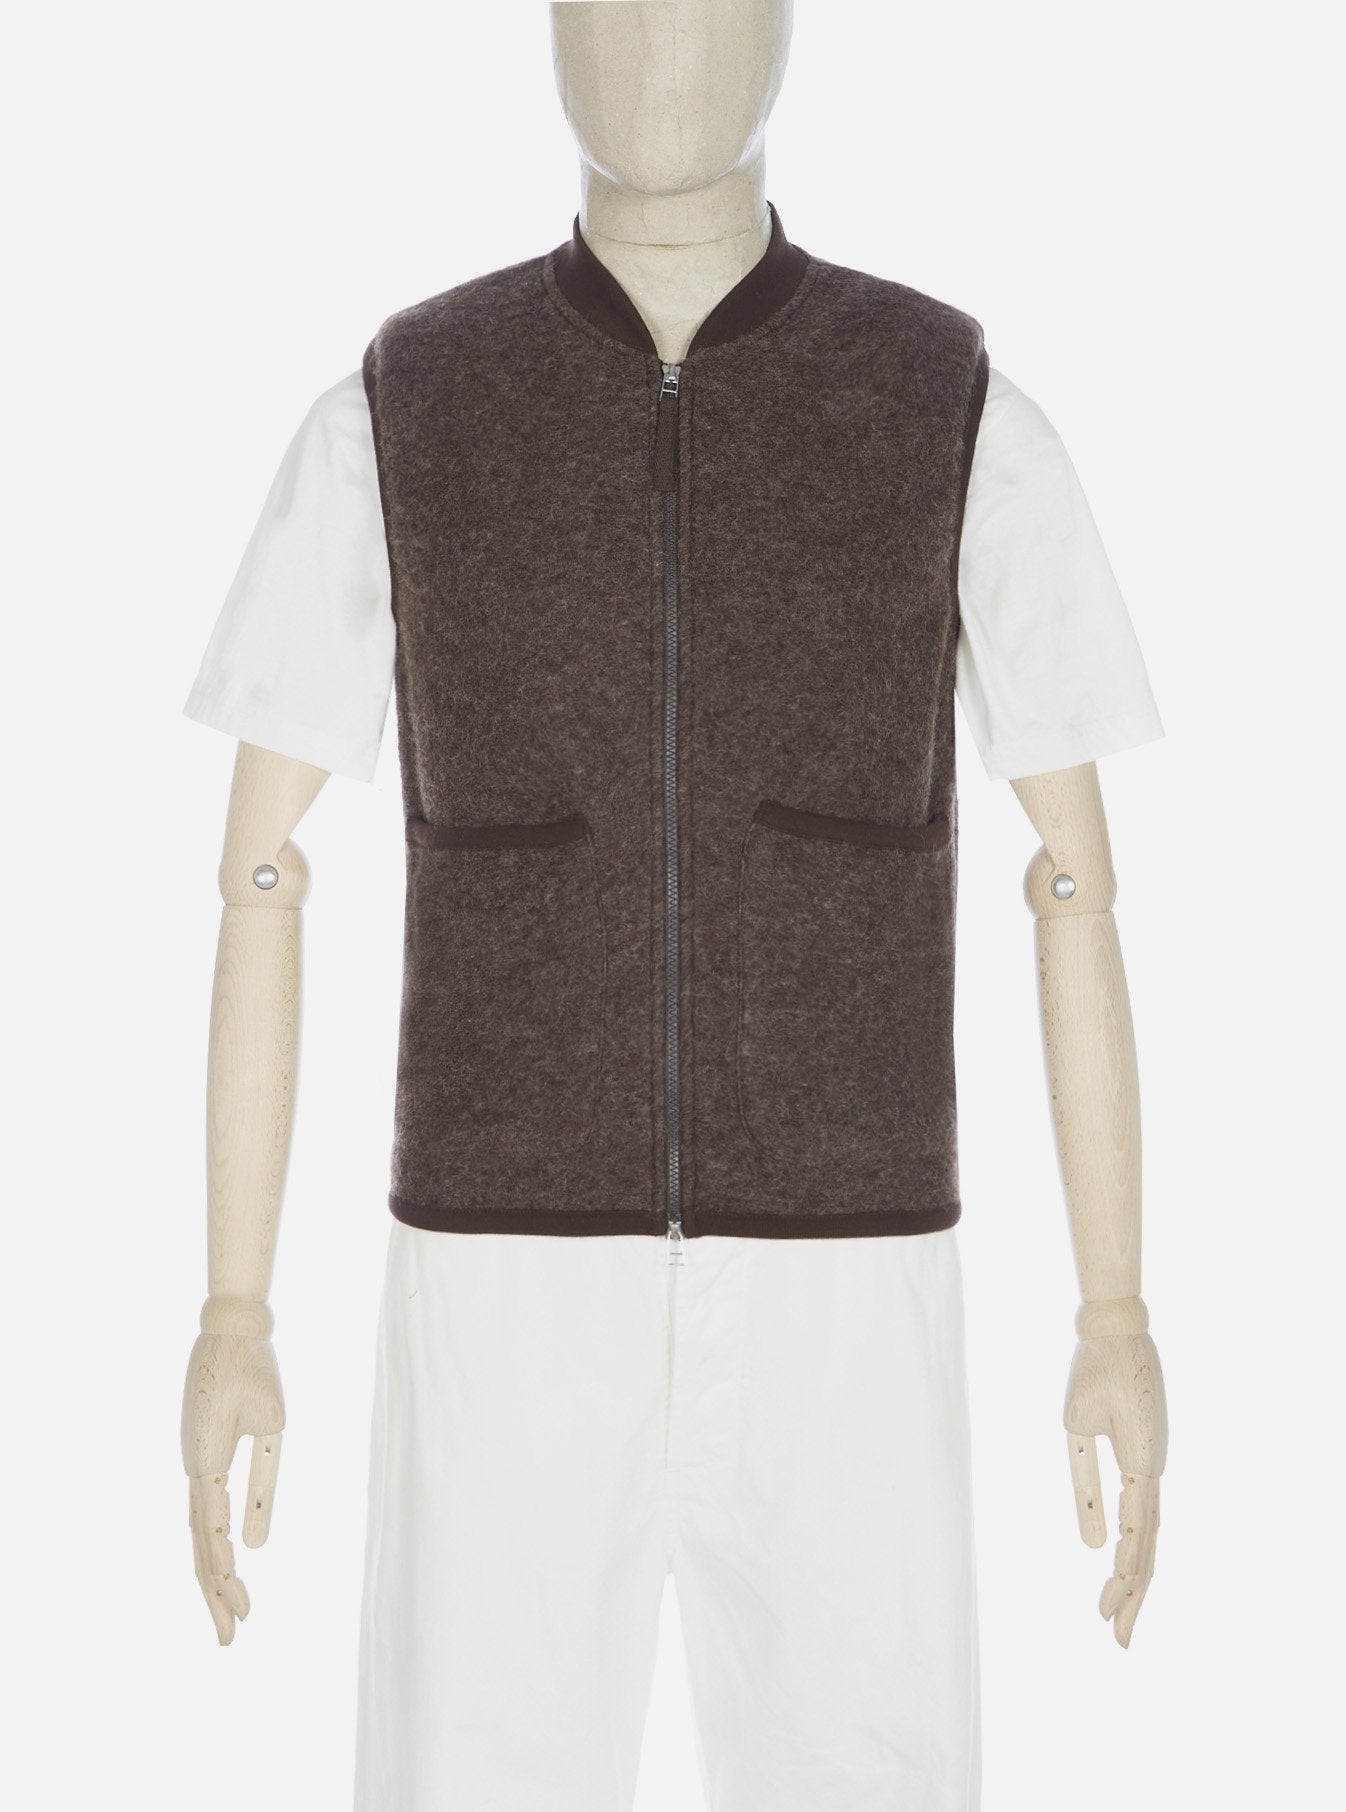 Universal Works Zip Waistcoat: Brown - The Union Project